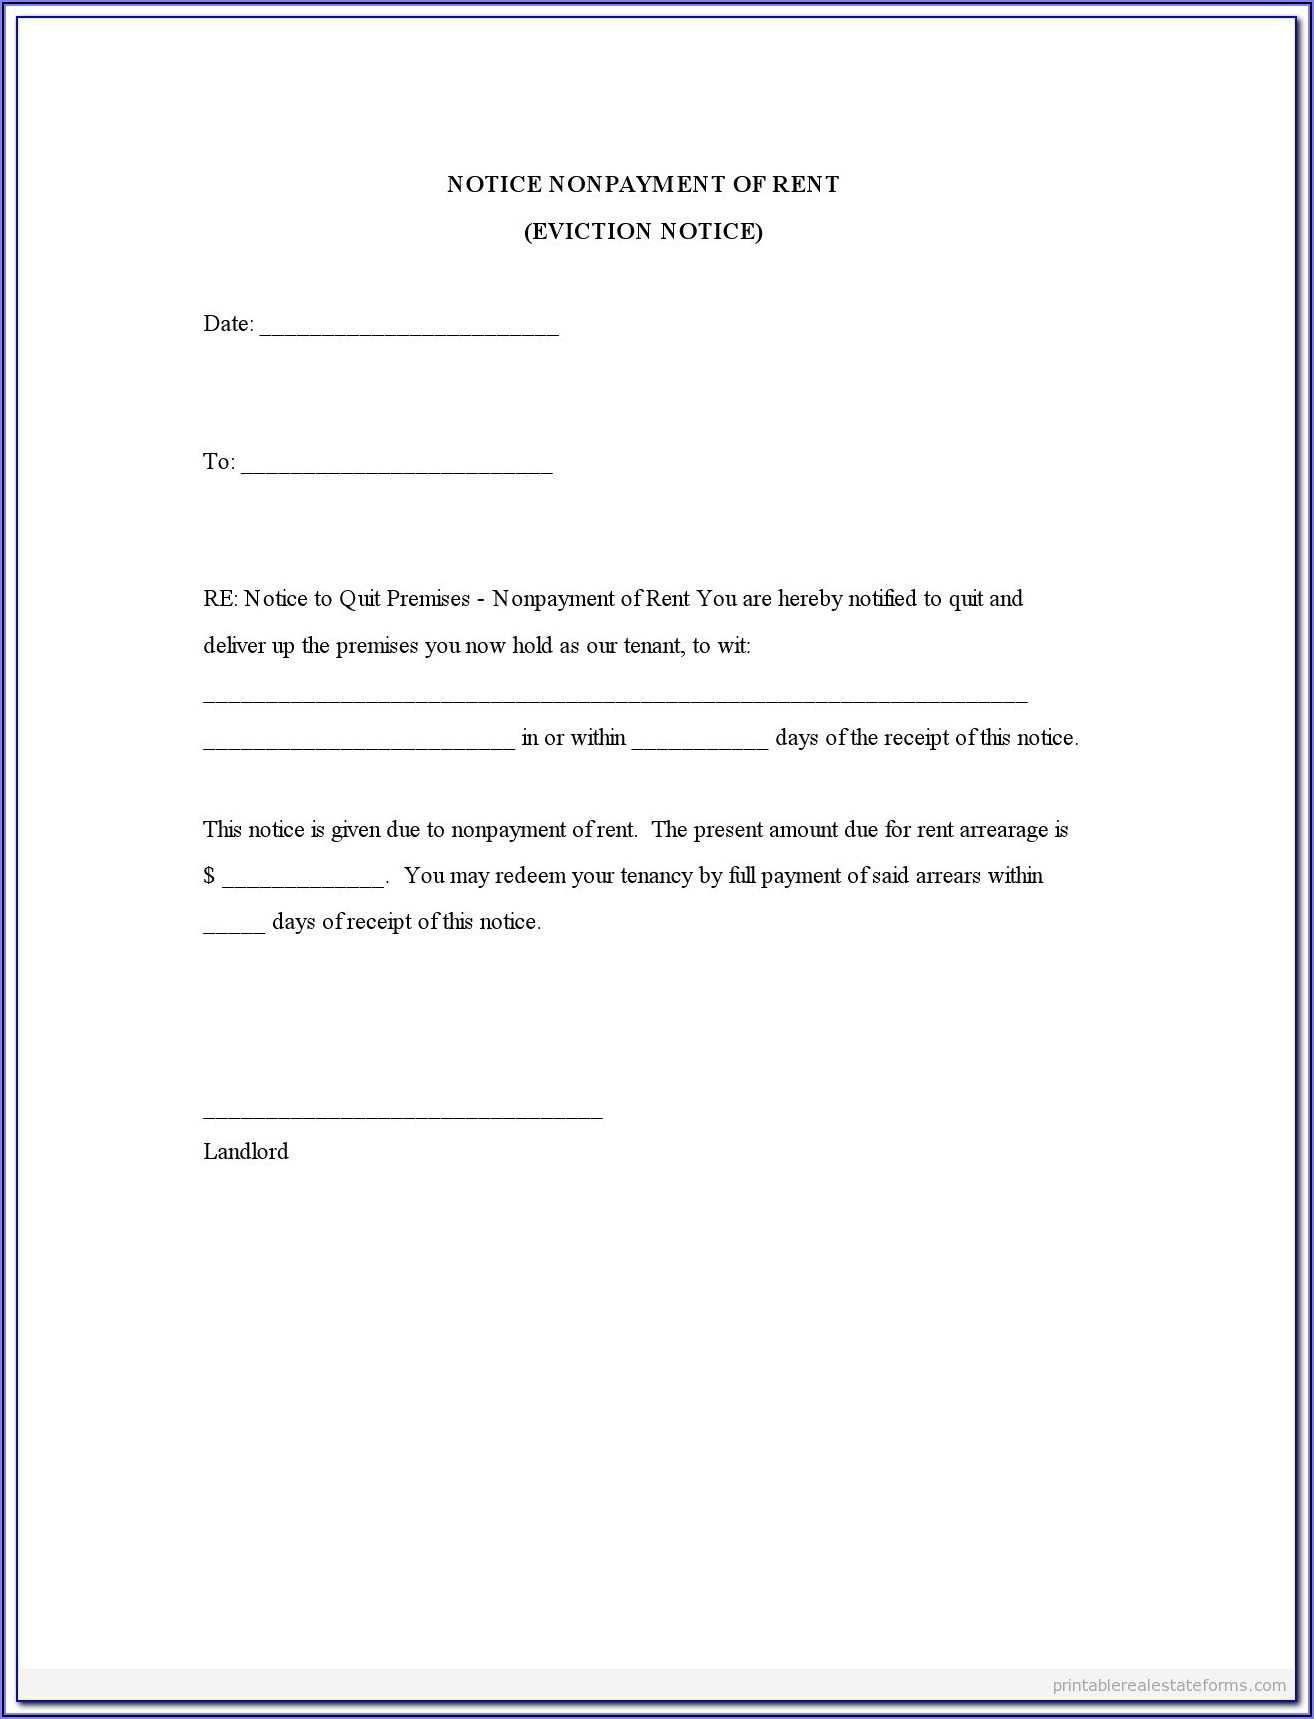 Eviction Notice Template Free Uk